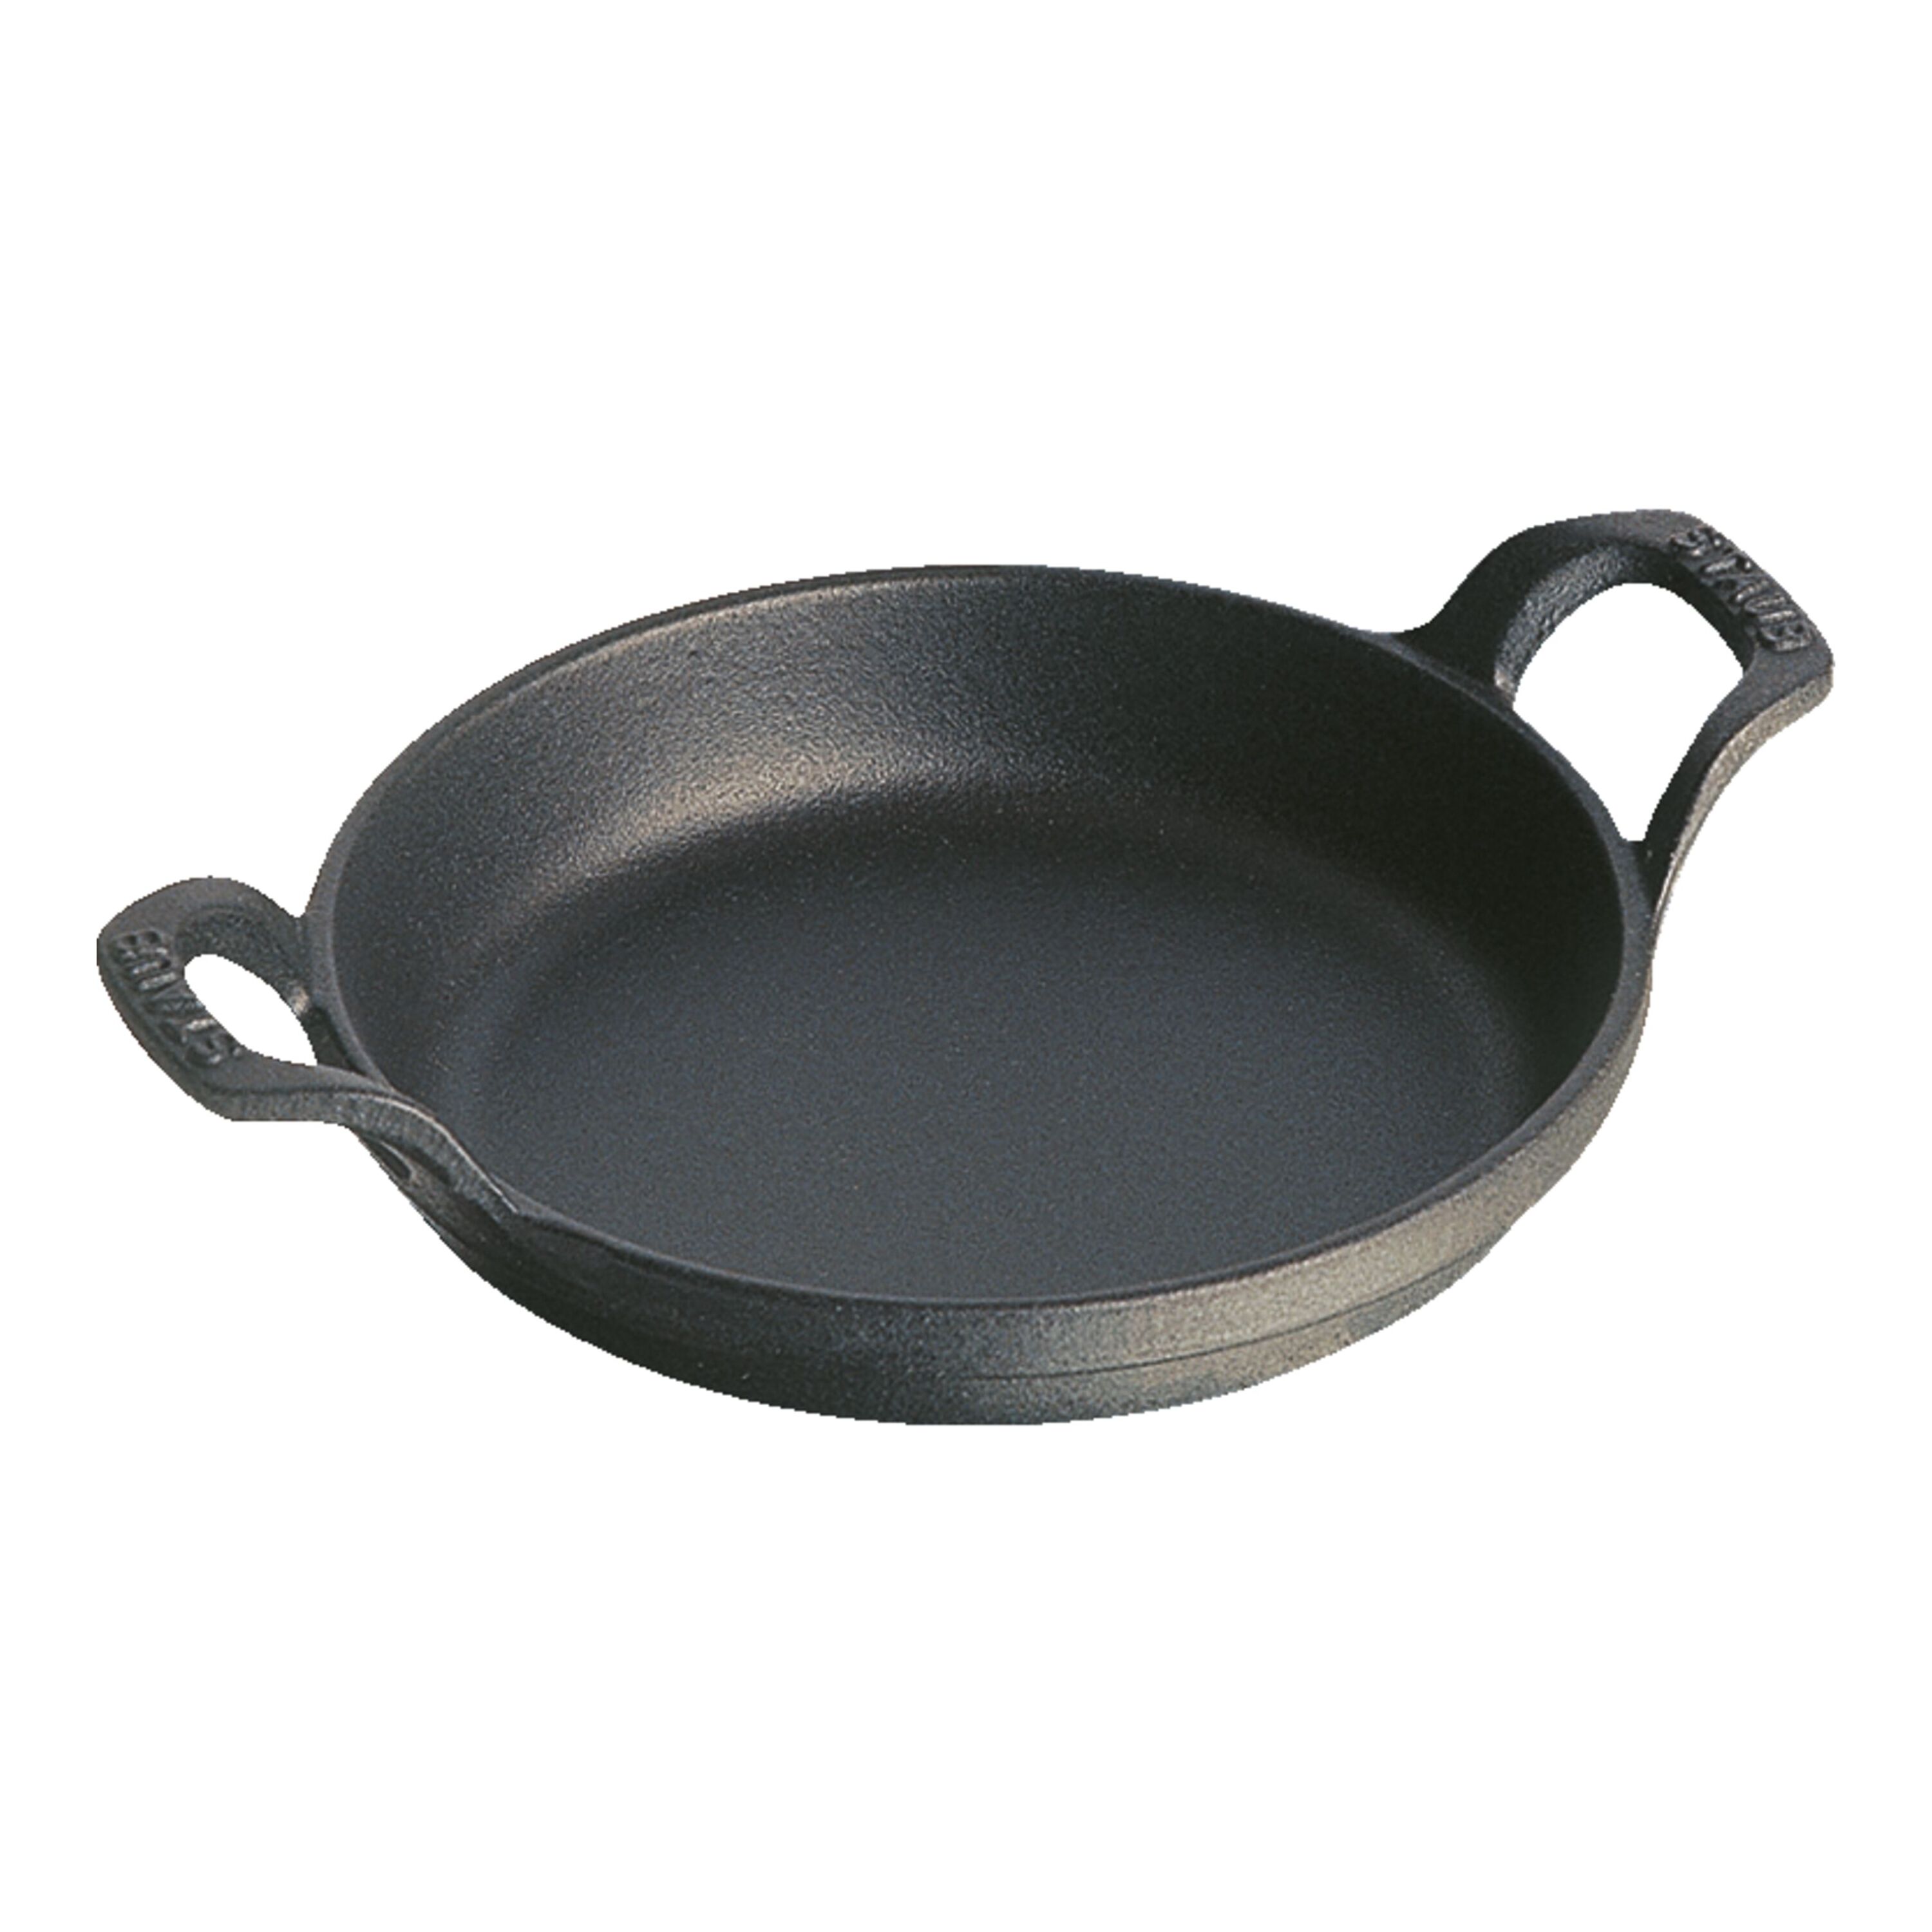  Master Pan Non-Stick Divided Grill/Fry/Oven Meal Skillet, 15,  Black: Home & Kitchen